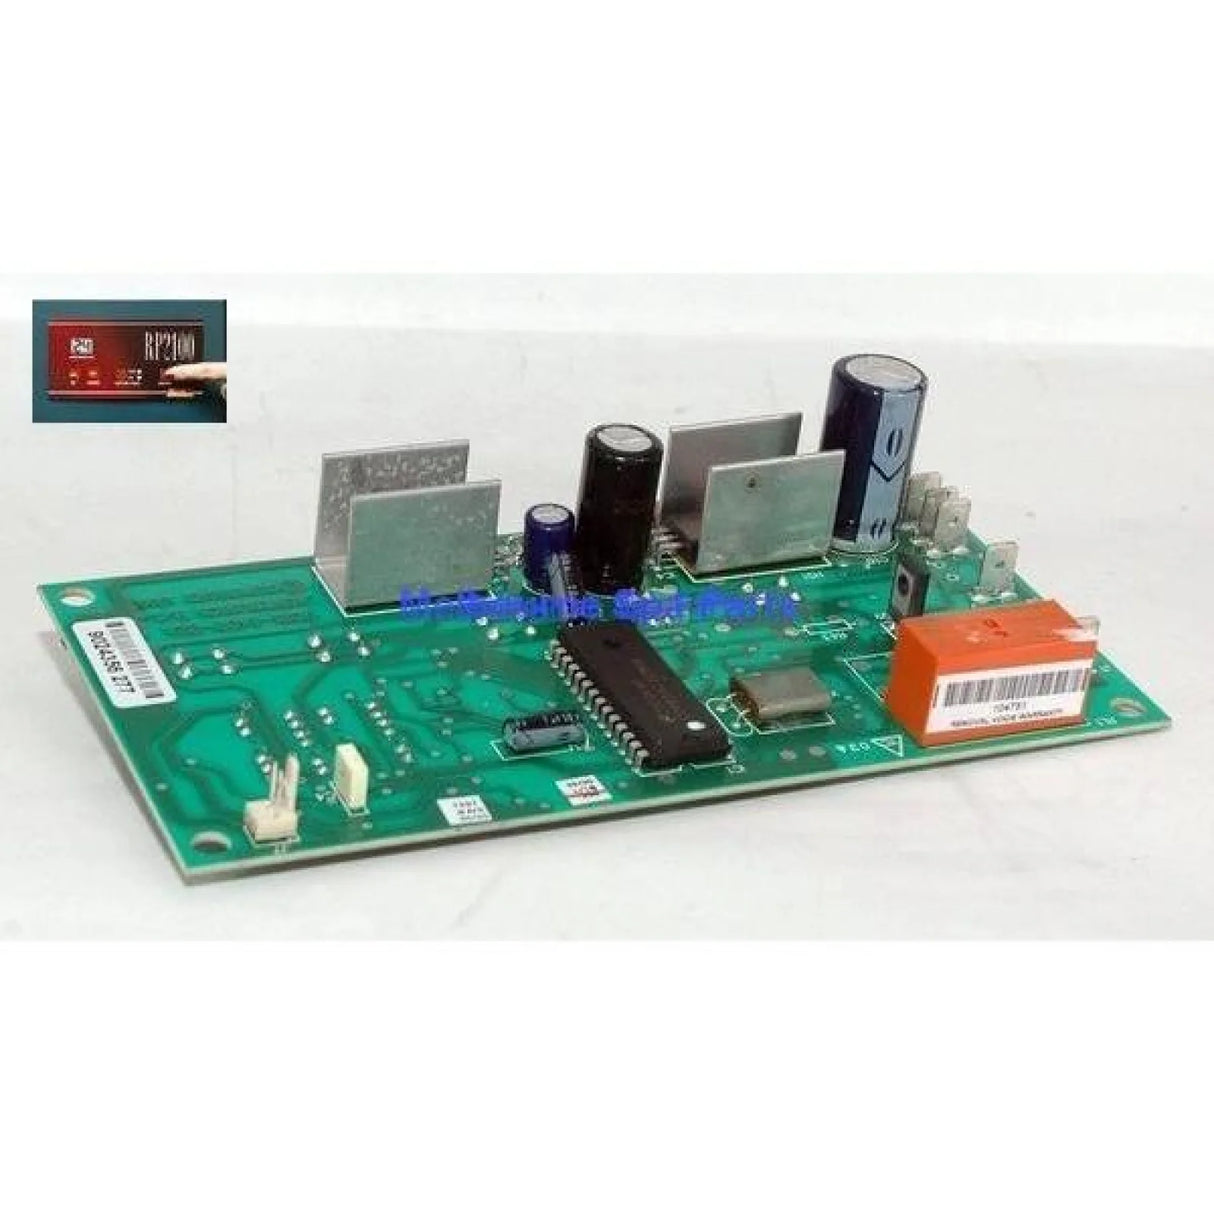 Raypak RP2100 Circuit Board PCB Thermostat Control Circuit Board - 56609184 - RP 2100 - Heater and Spa Parts